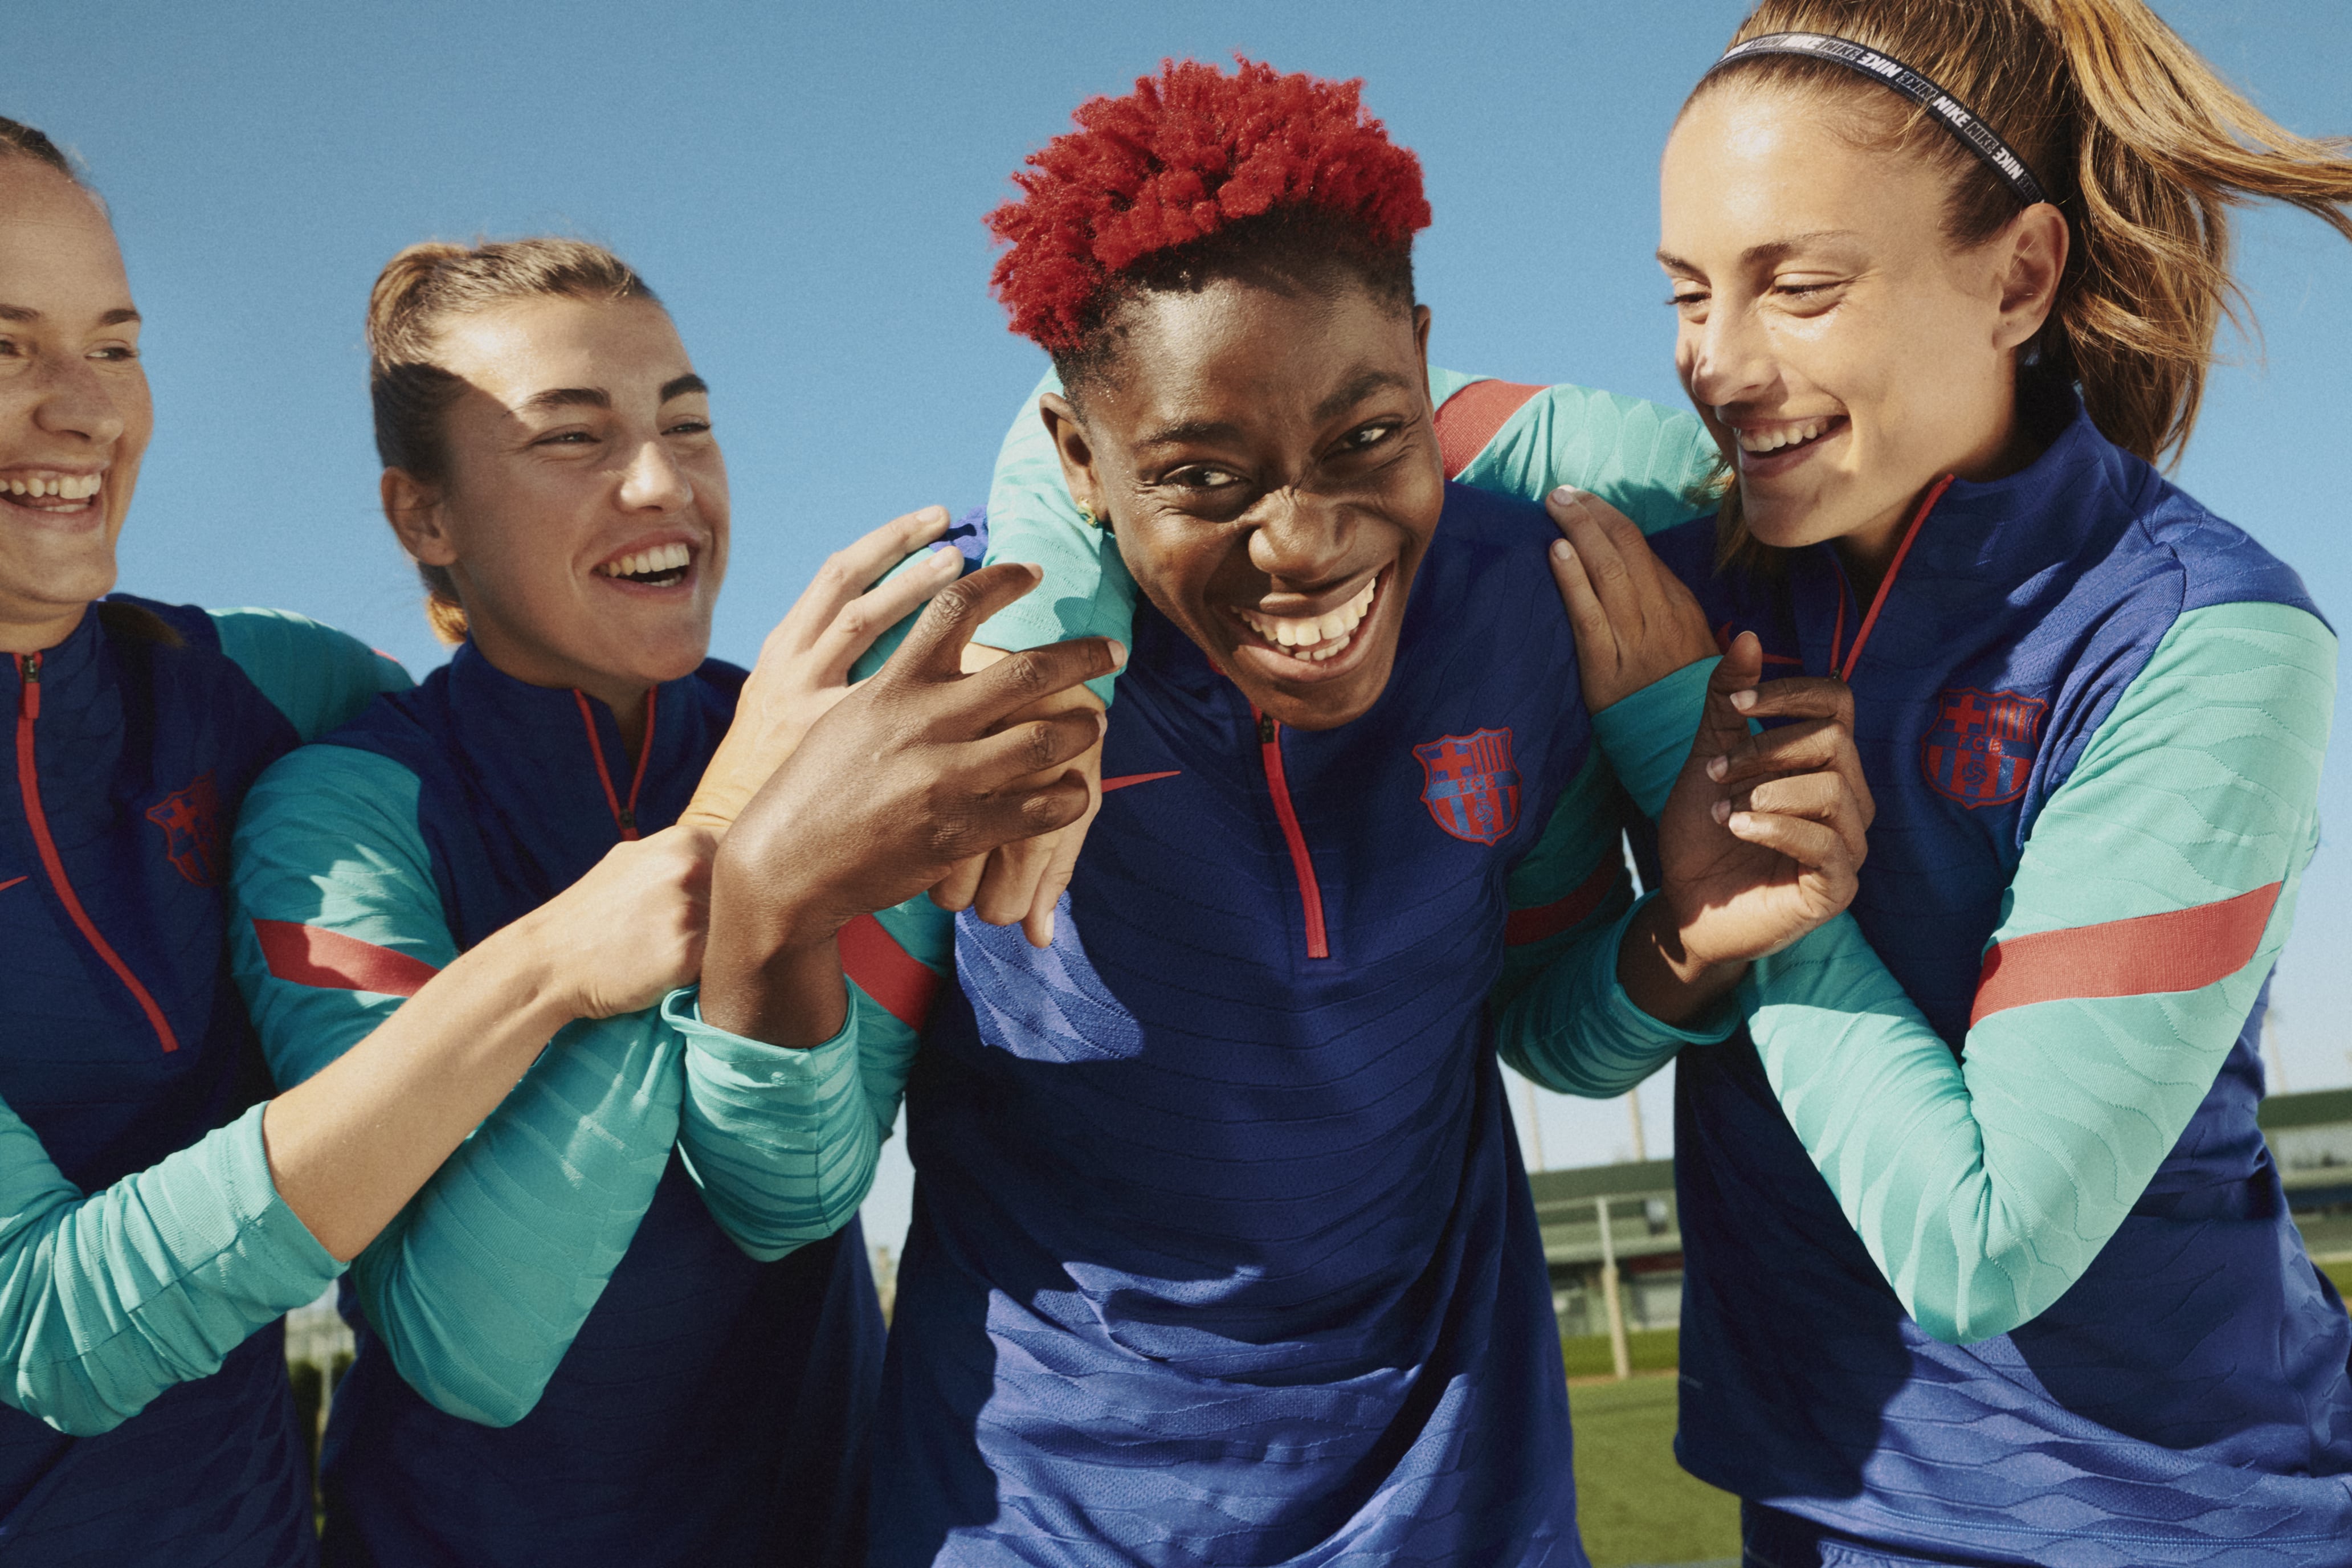 FC Barcelona launches new training kit featuring the very latest technology